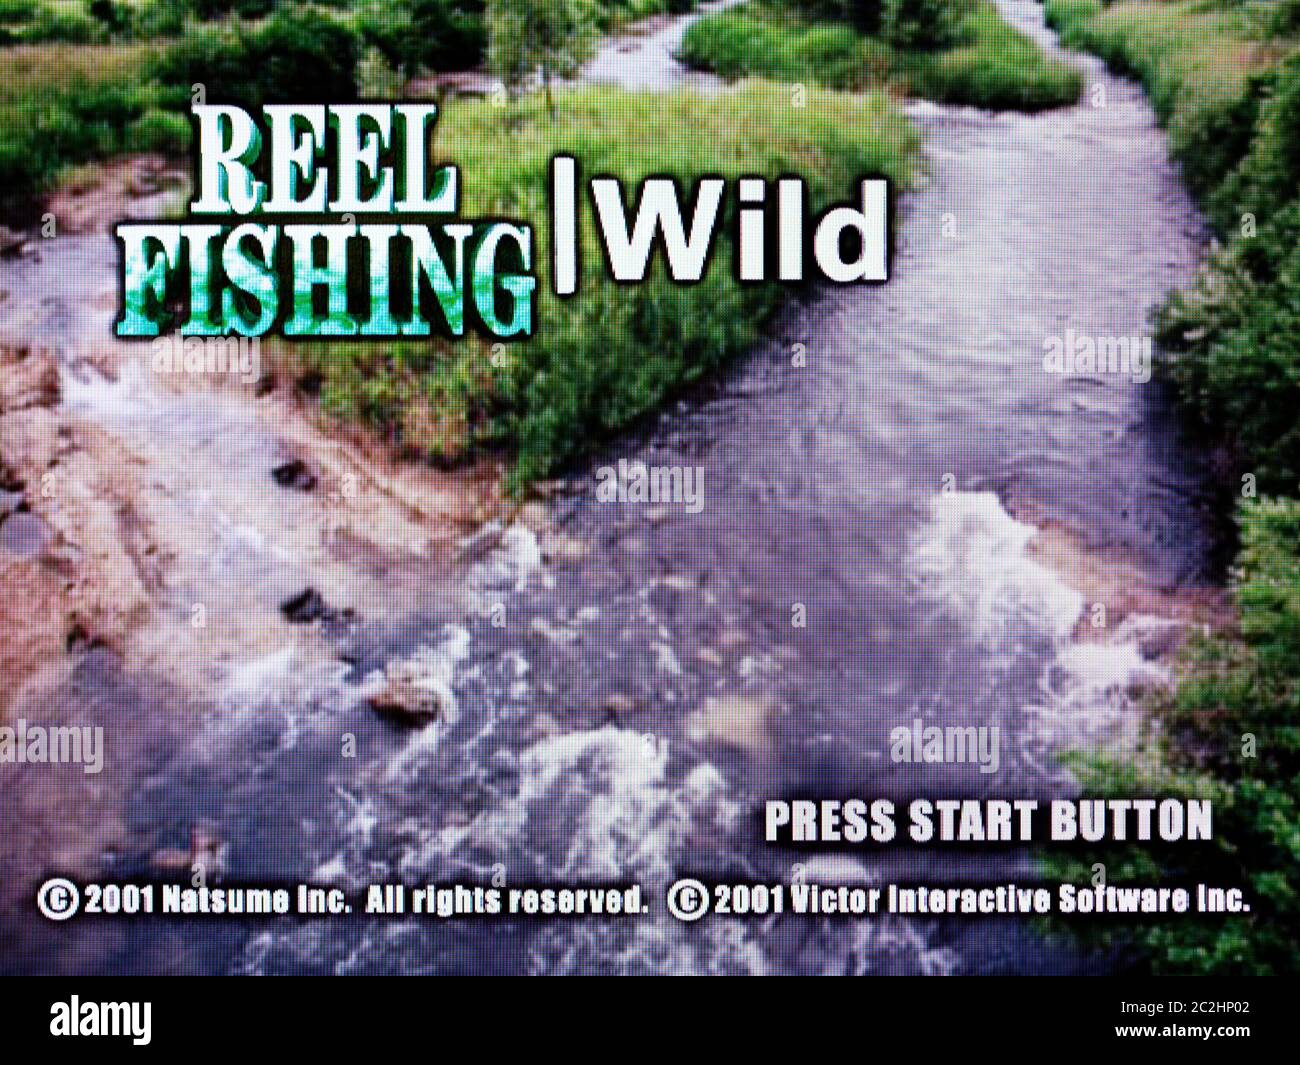 Reel Fishing Wild - Sega Dreamcast Videogame - Editorial use only